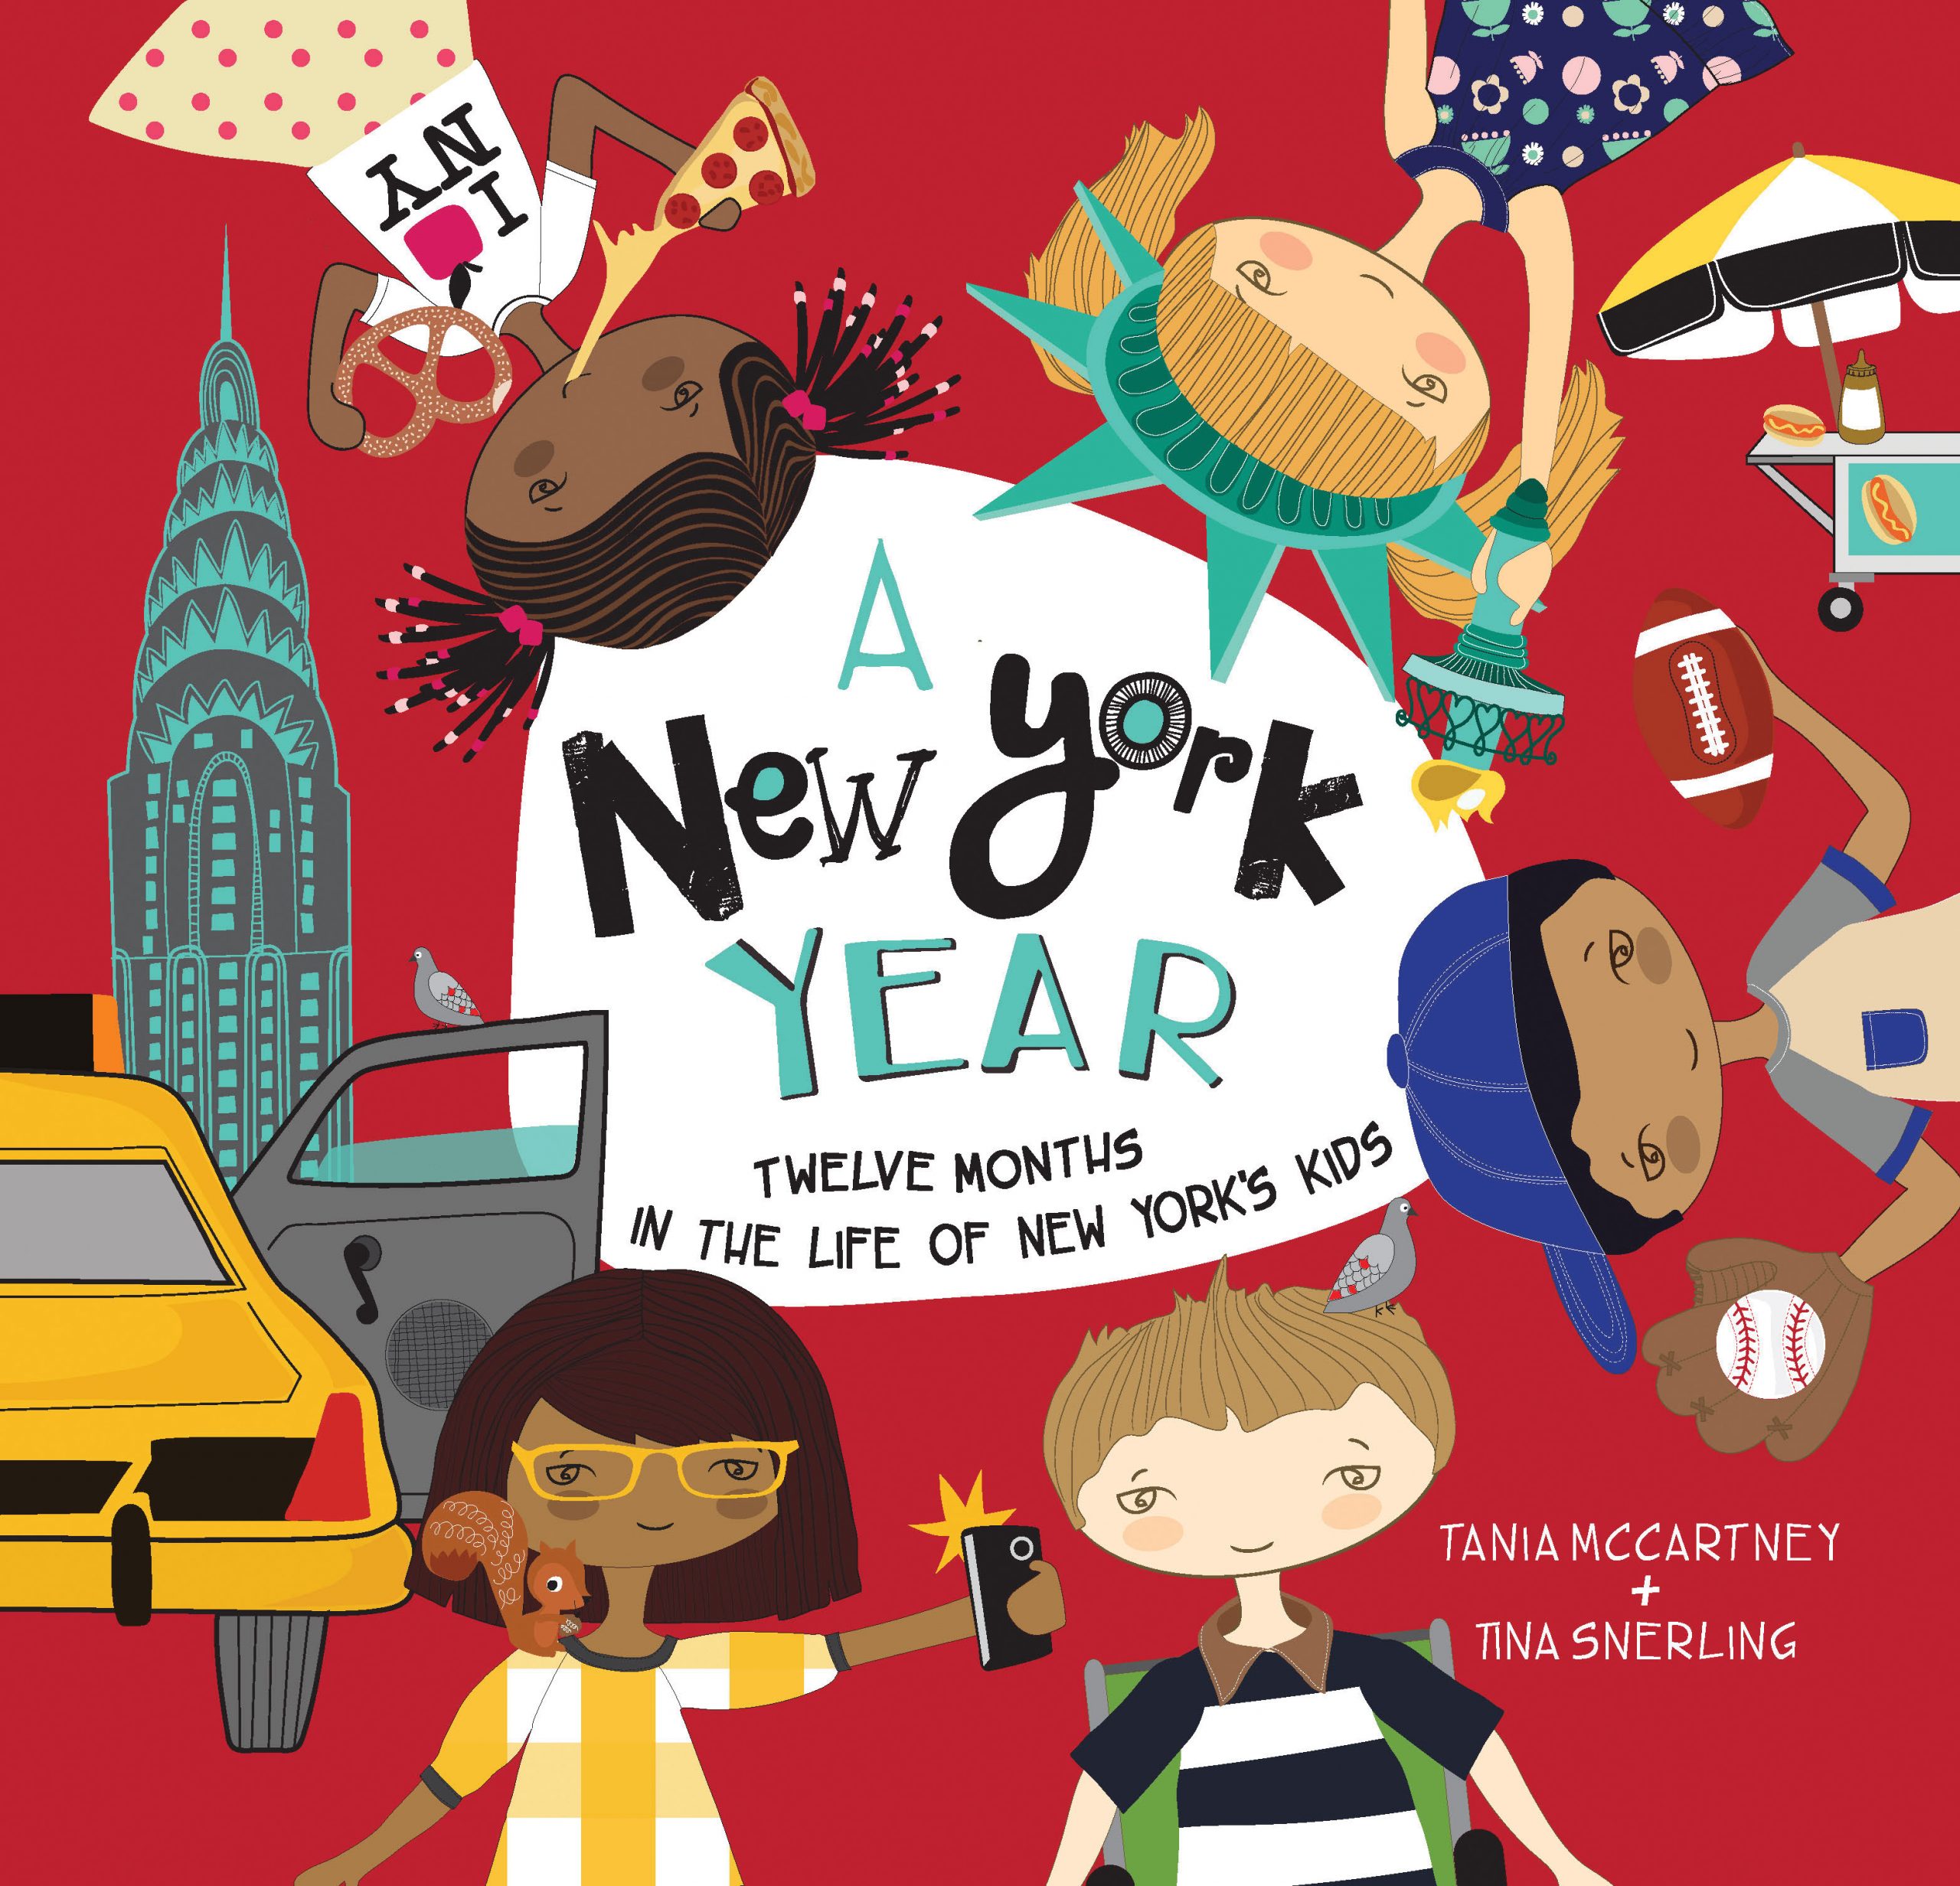 A New York Year: Twelve Months in the Life of New York's Kids